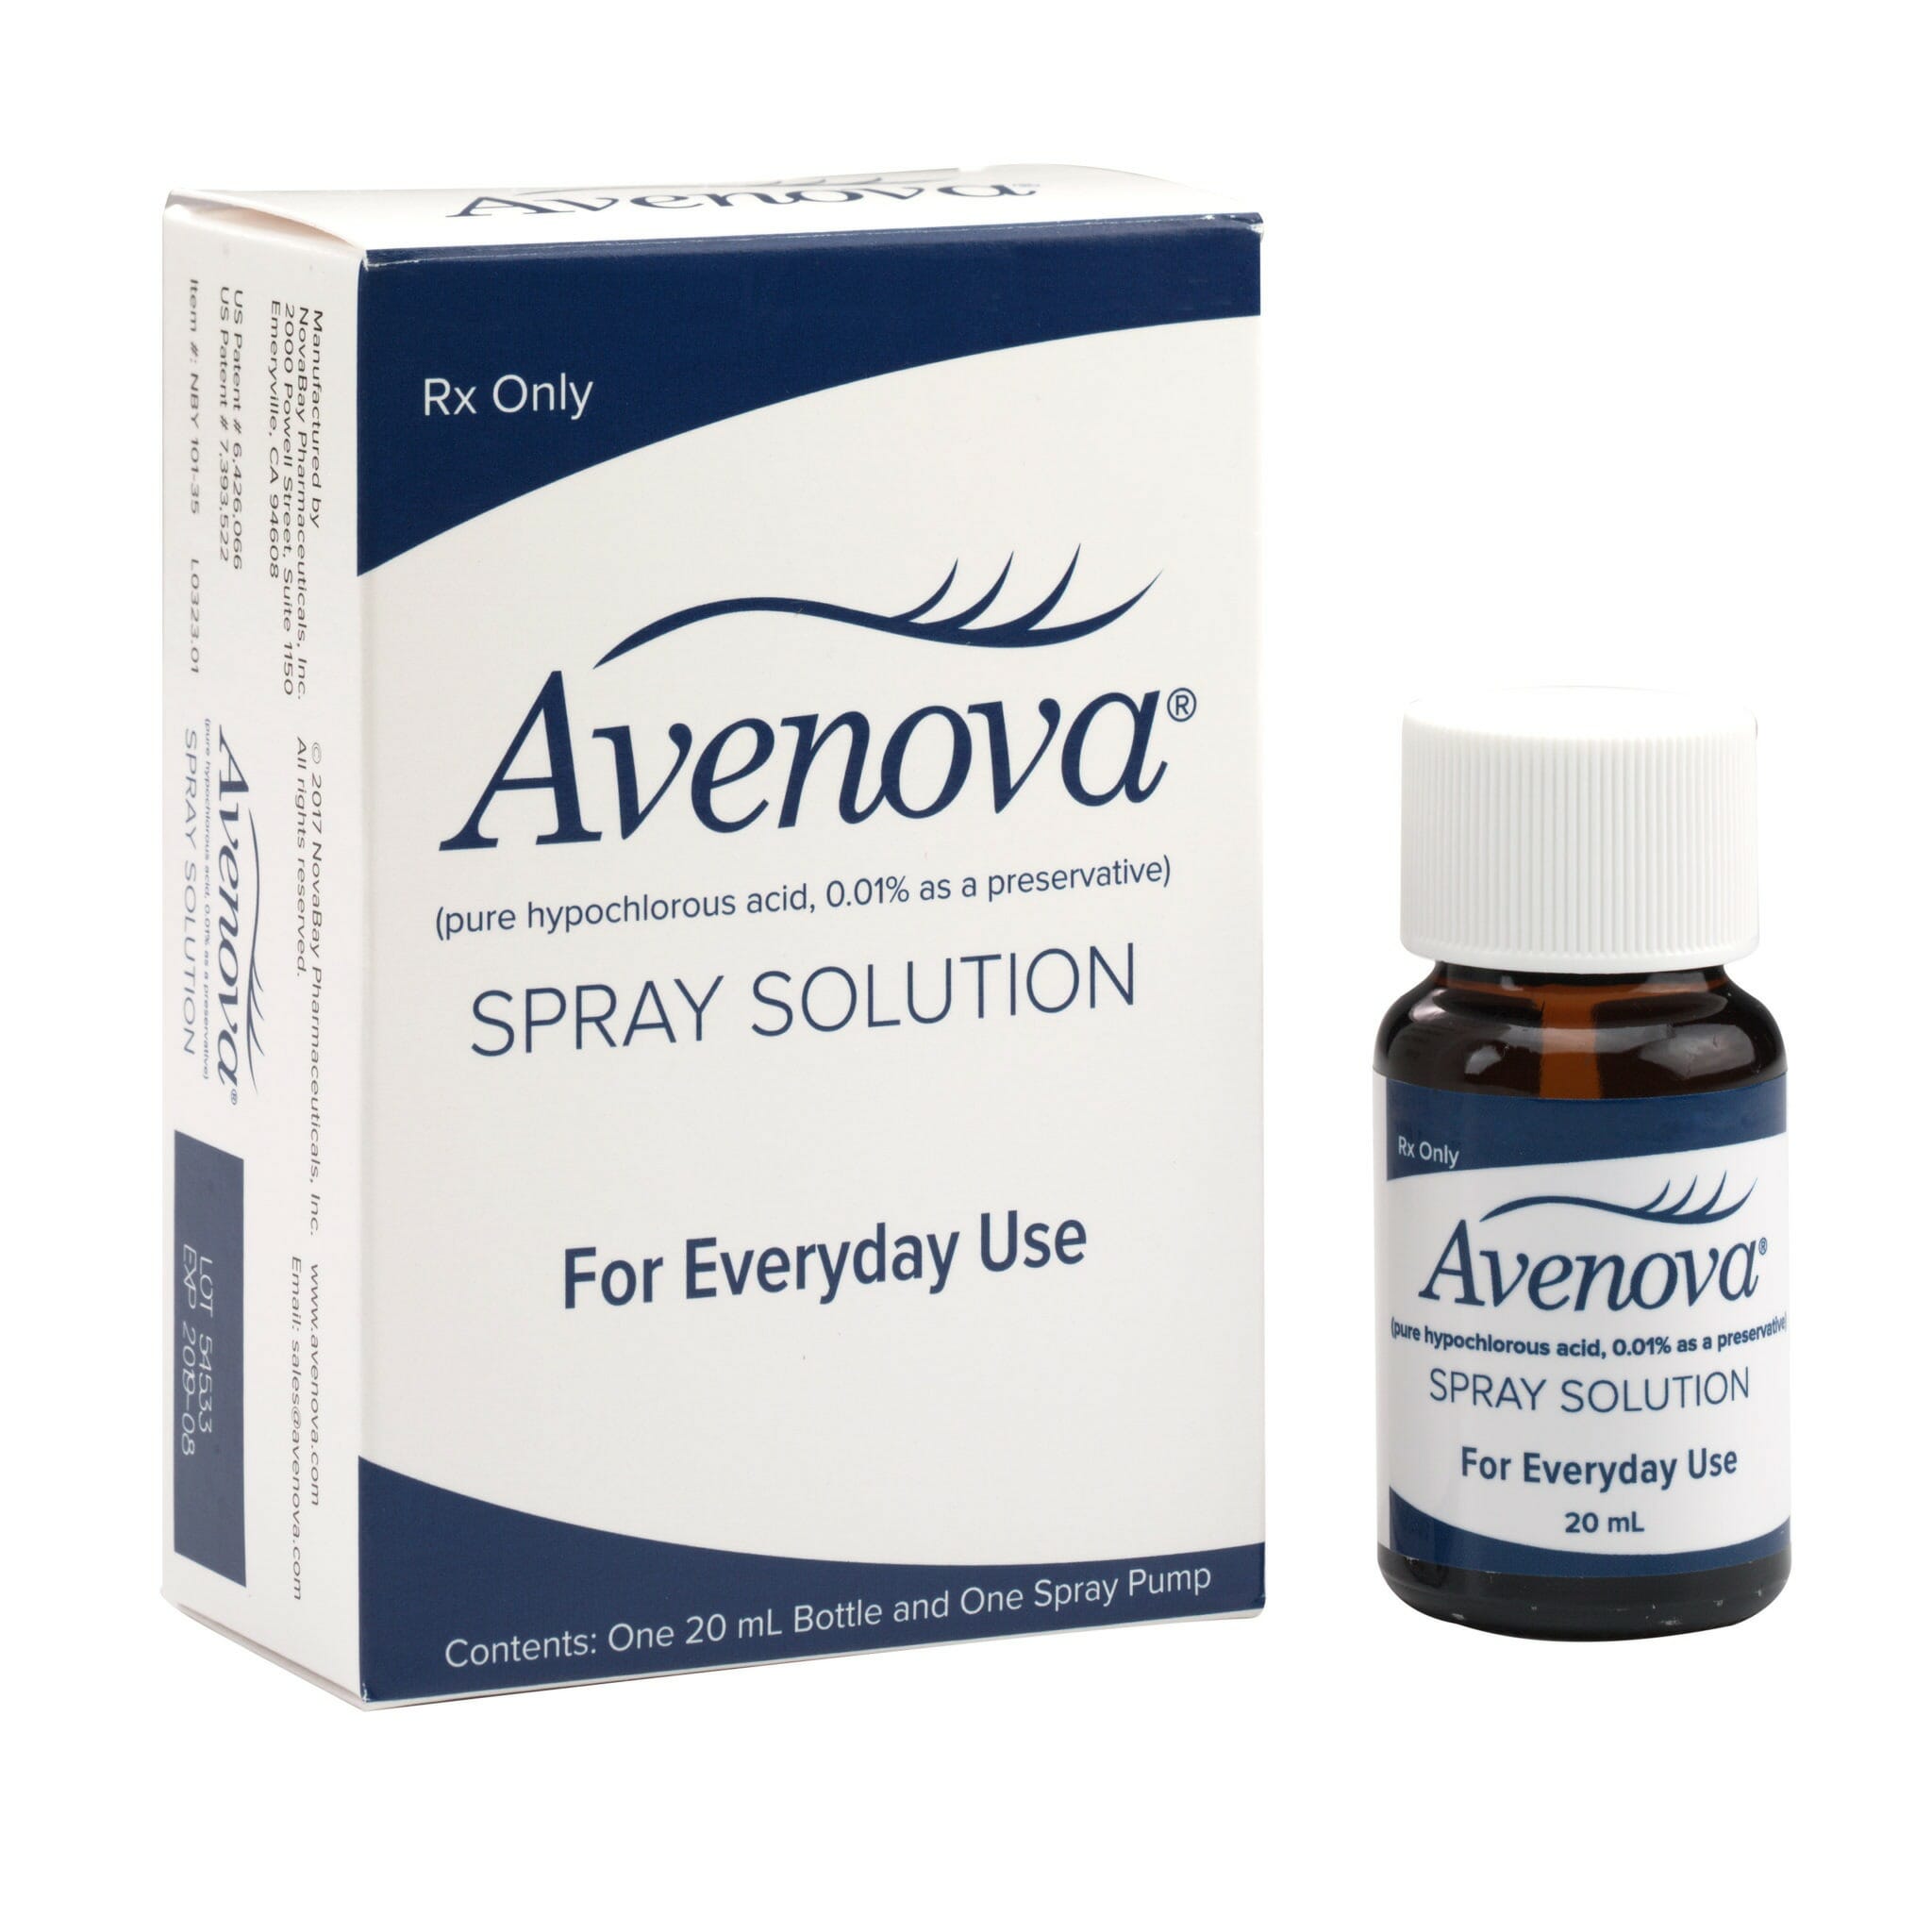 What is the main purpose of the Avenova eyelid and eyelash cleanser?